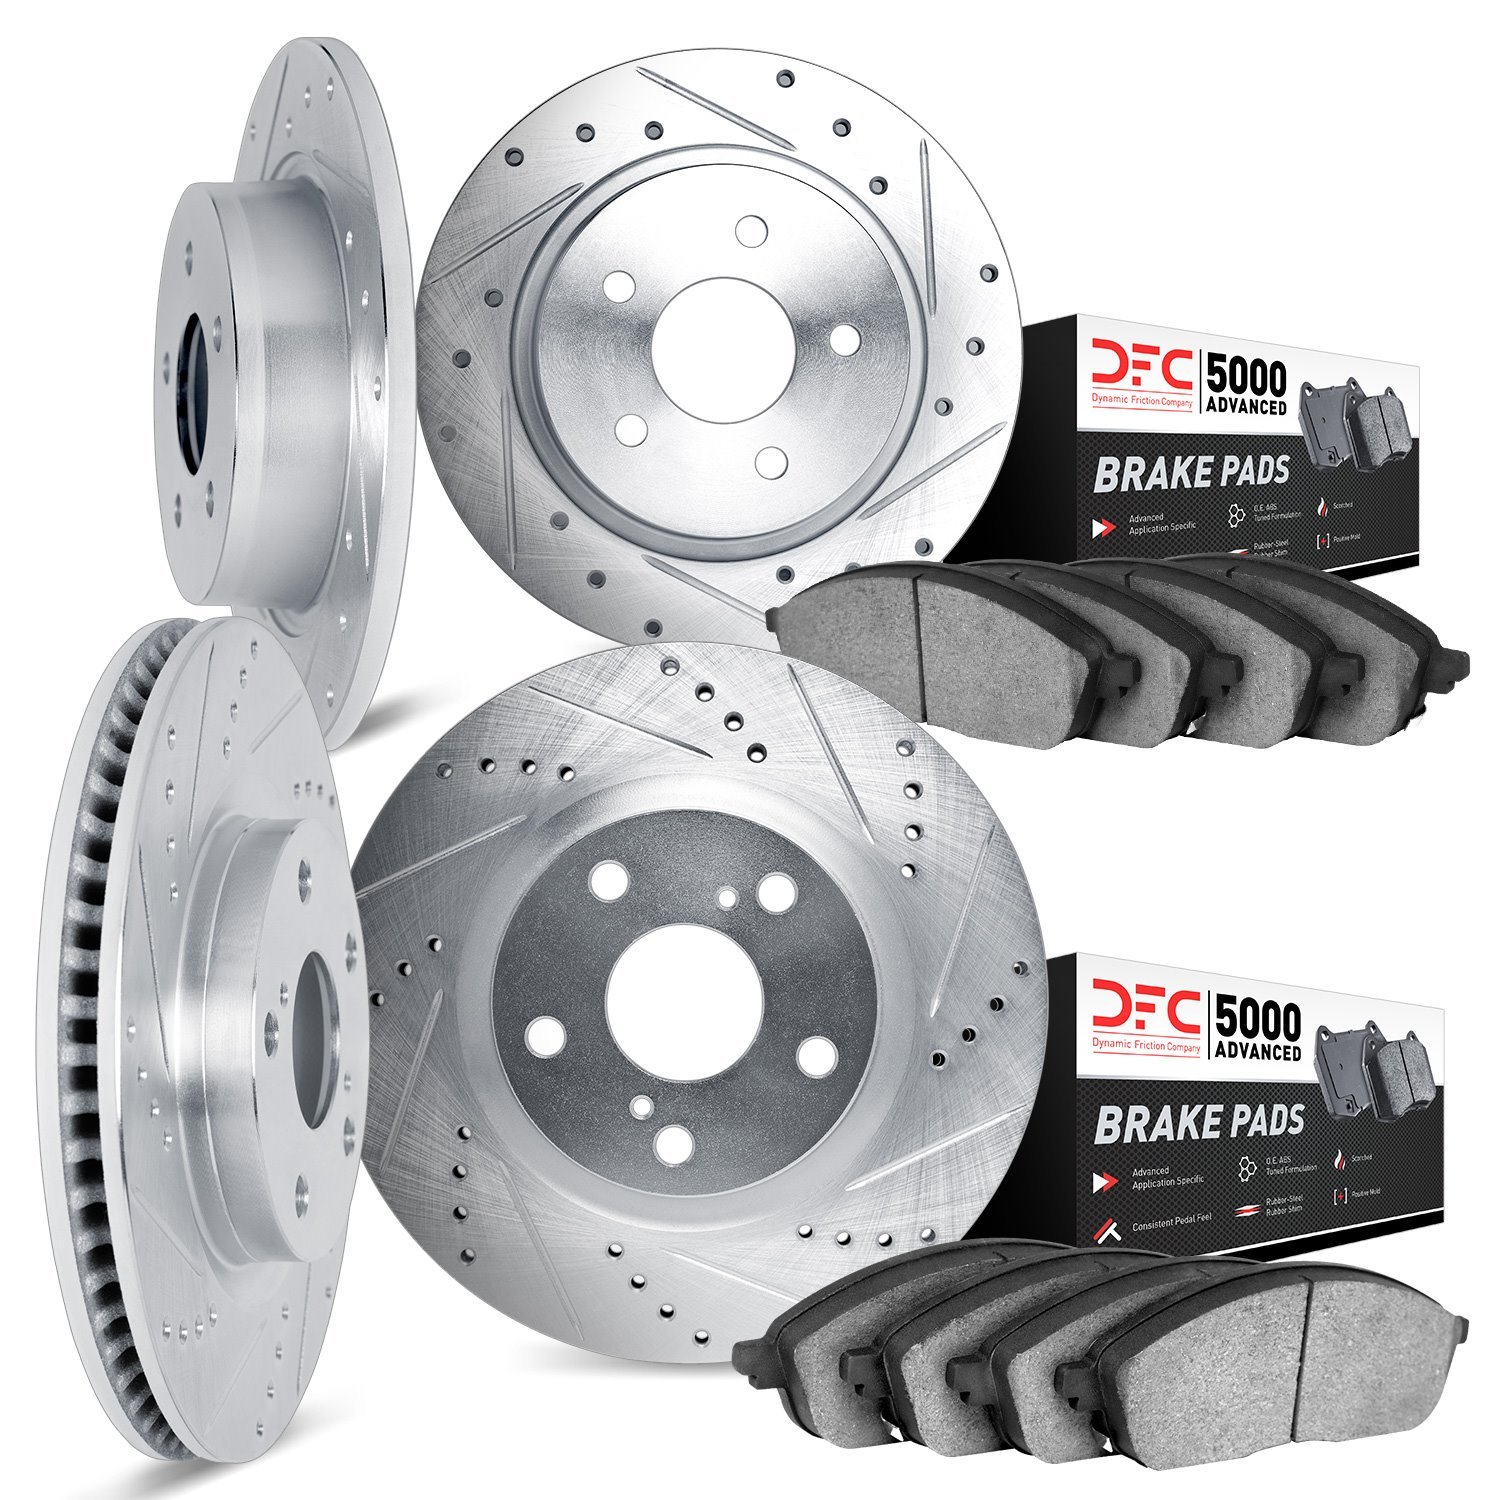 7504-11000 Drilled/Slotted Brake Rotors w/5000 Advanced Brake Pads Kit [Silver], 1994-2016 Land Rover, Position: Front and Rear